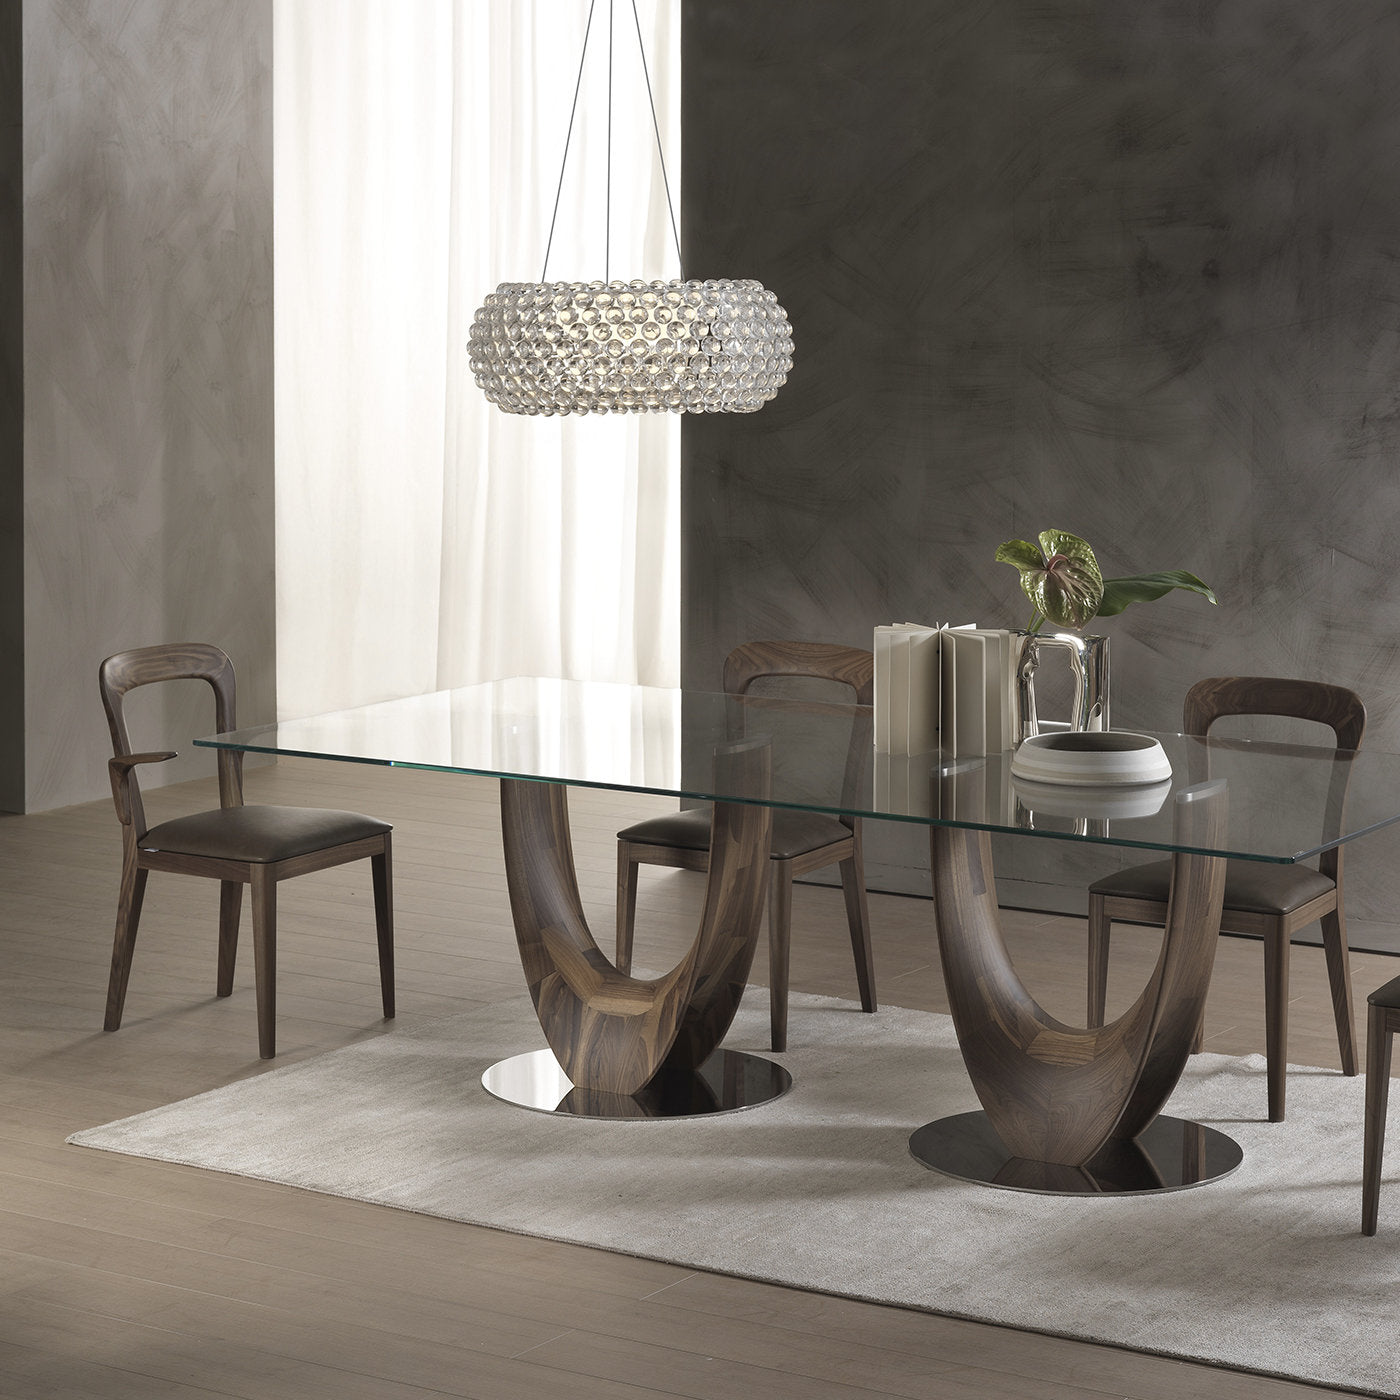 Axis Large Dining with Clear Glass Top Table by Stefano Bigi - Alternative view 1